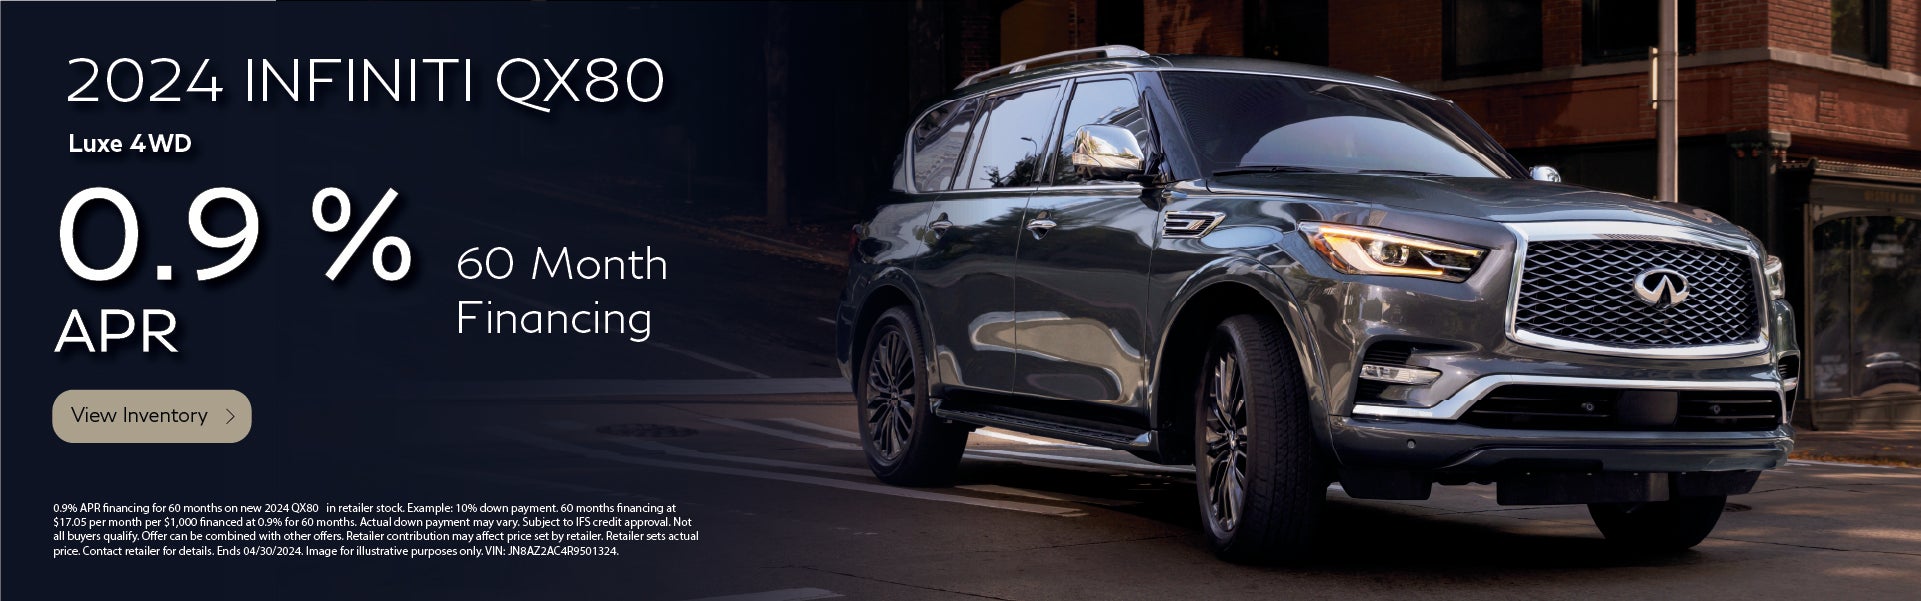 2024 INFINITI QX80 Luxe 4WD Offer